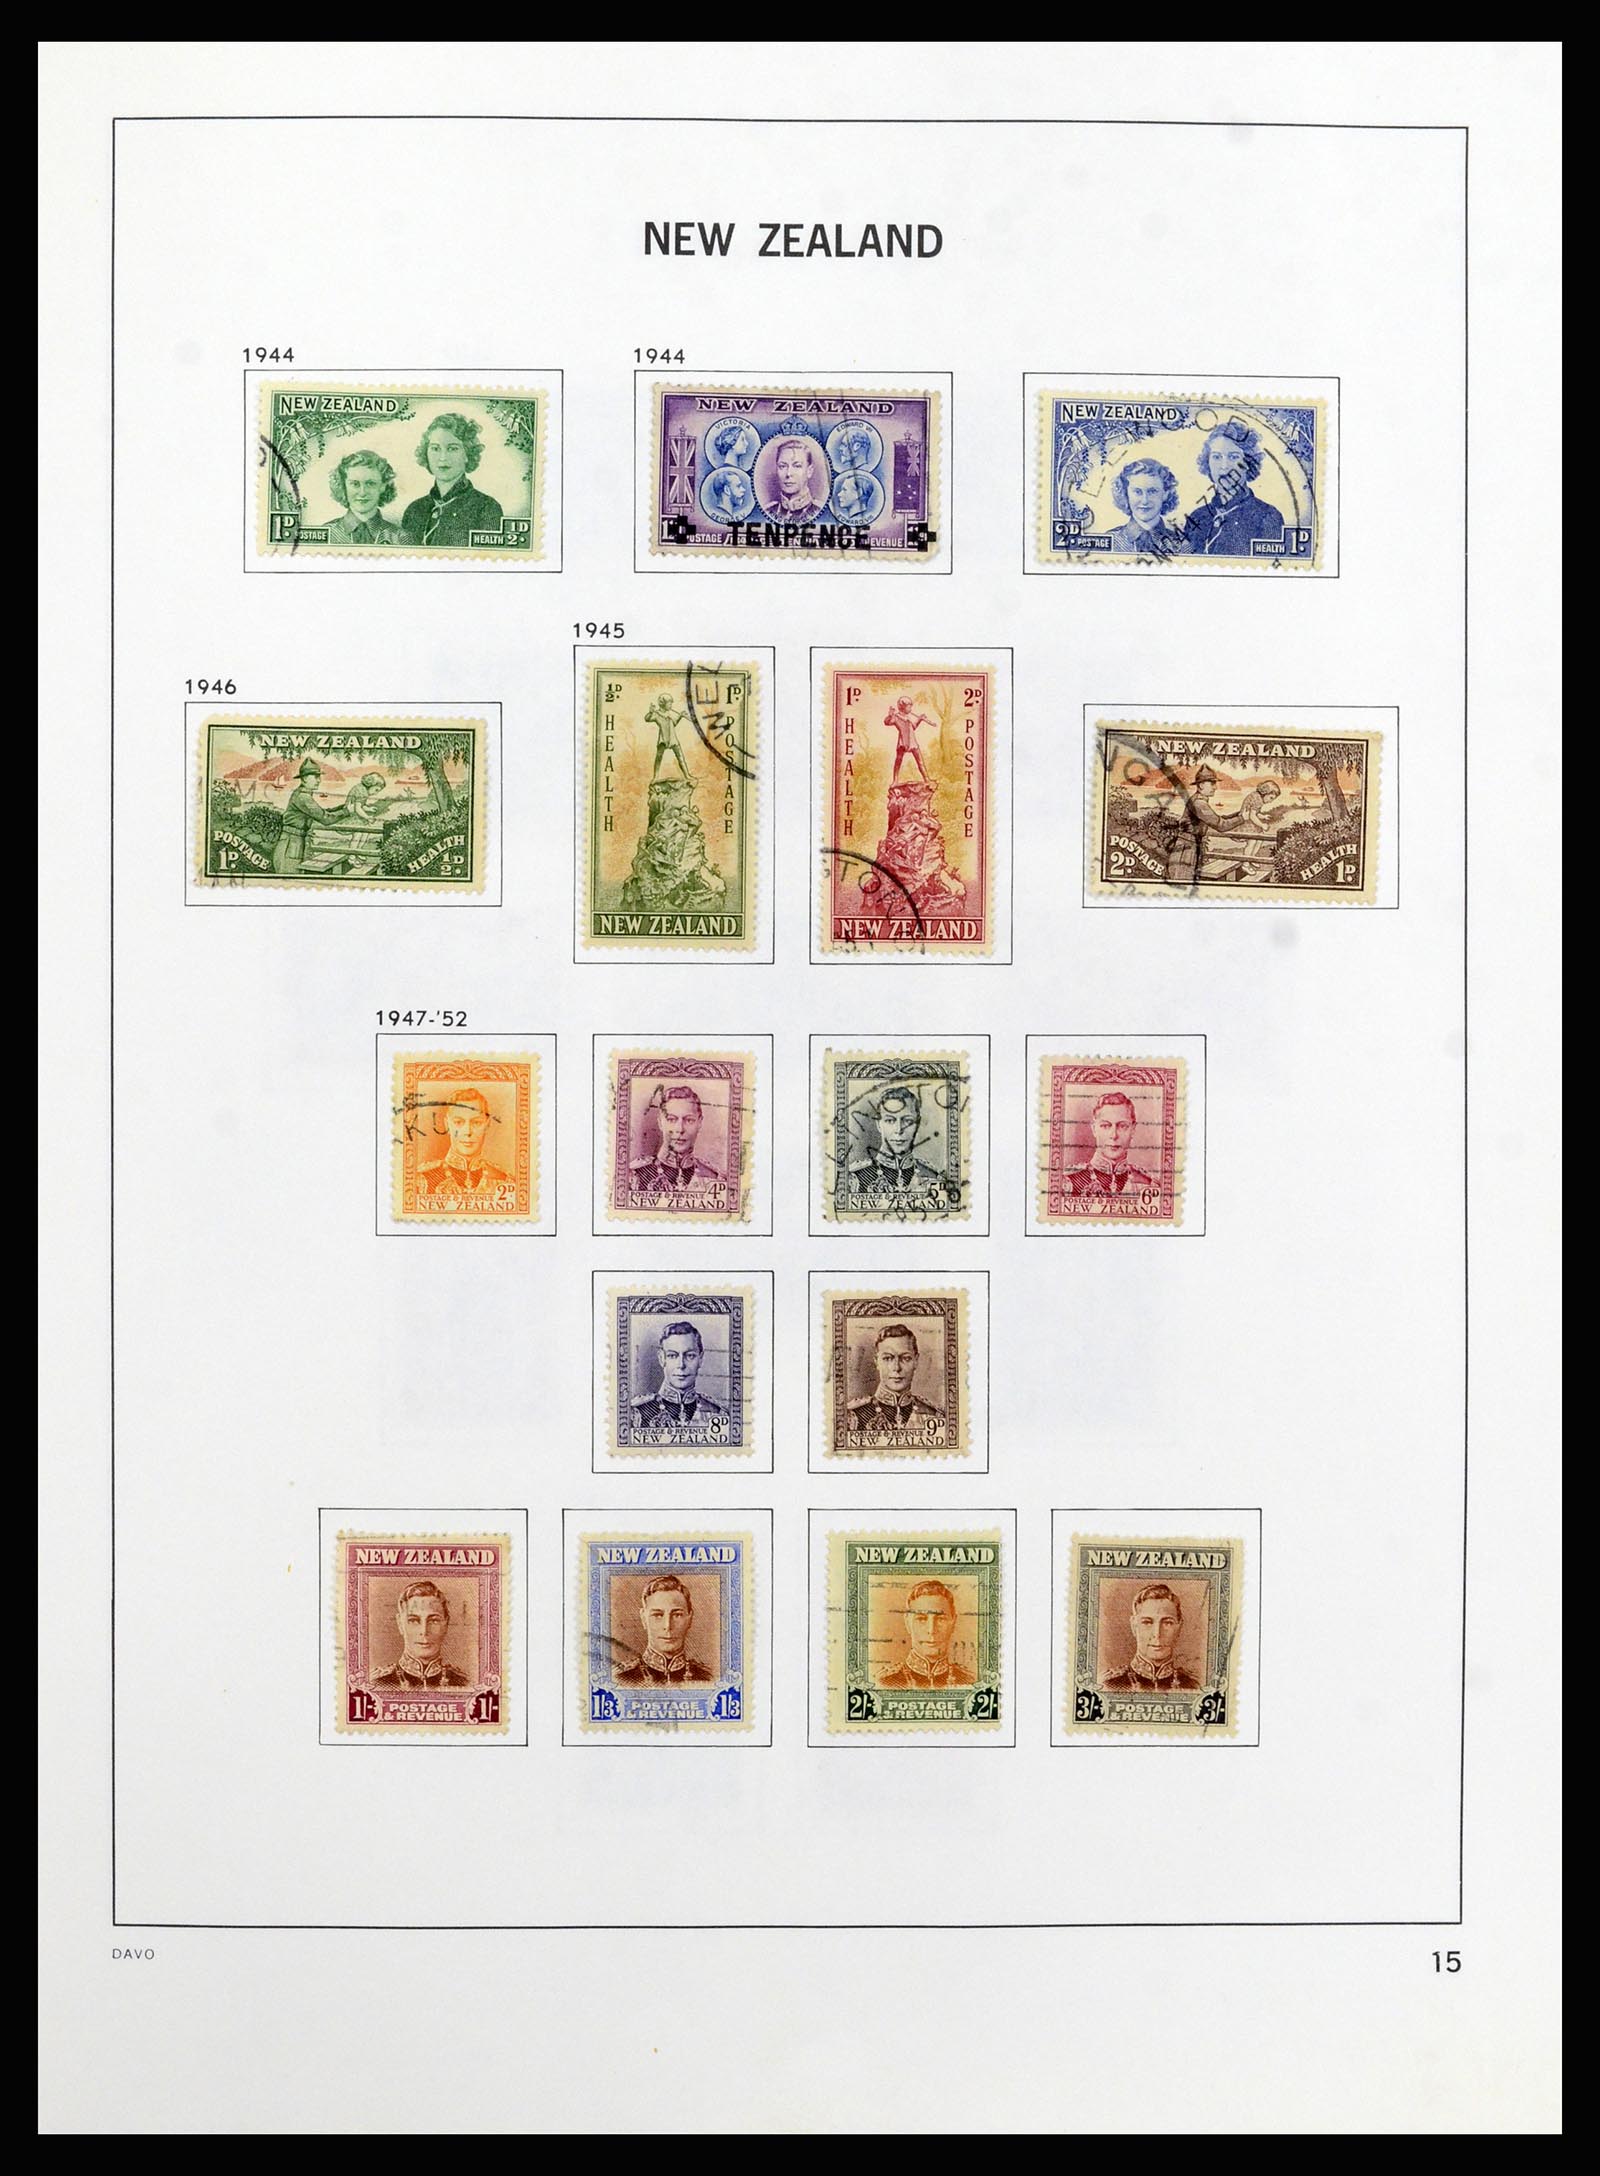 37209 016 - Stamp collection 37209 New Zealand 1855-1997.